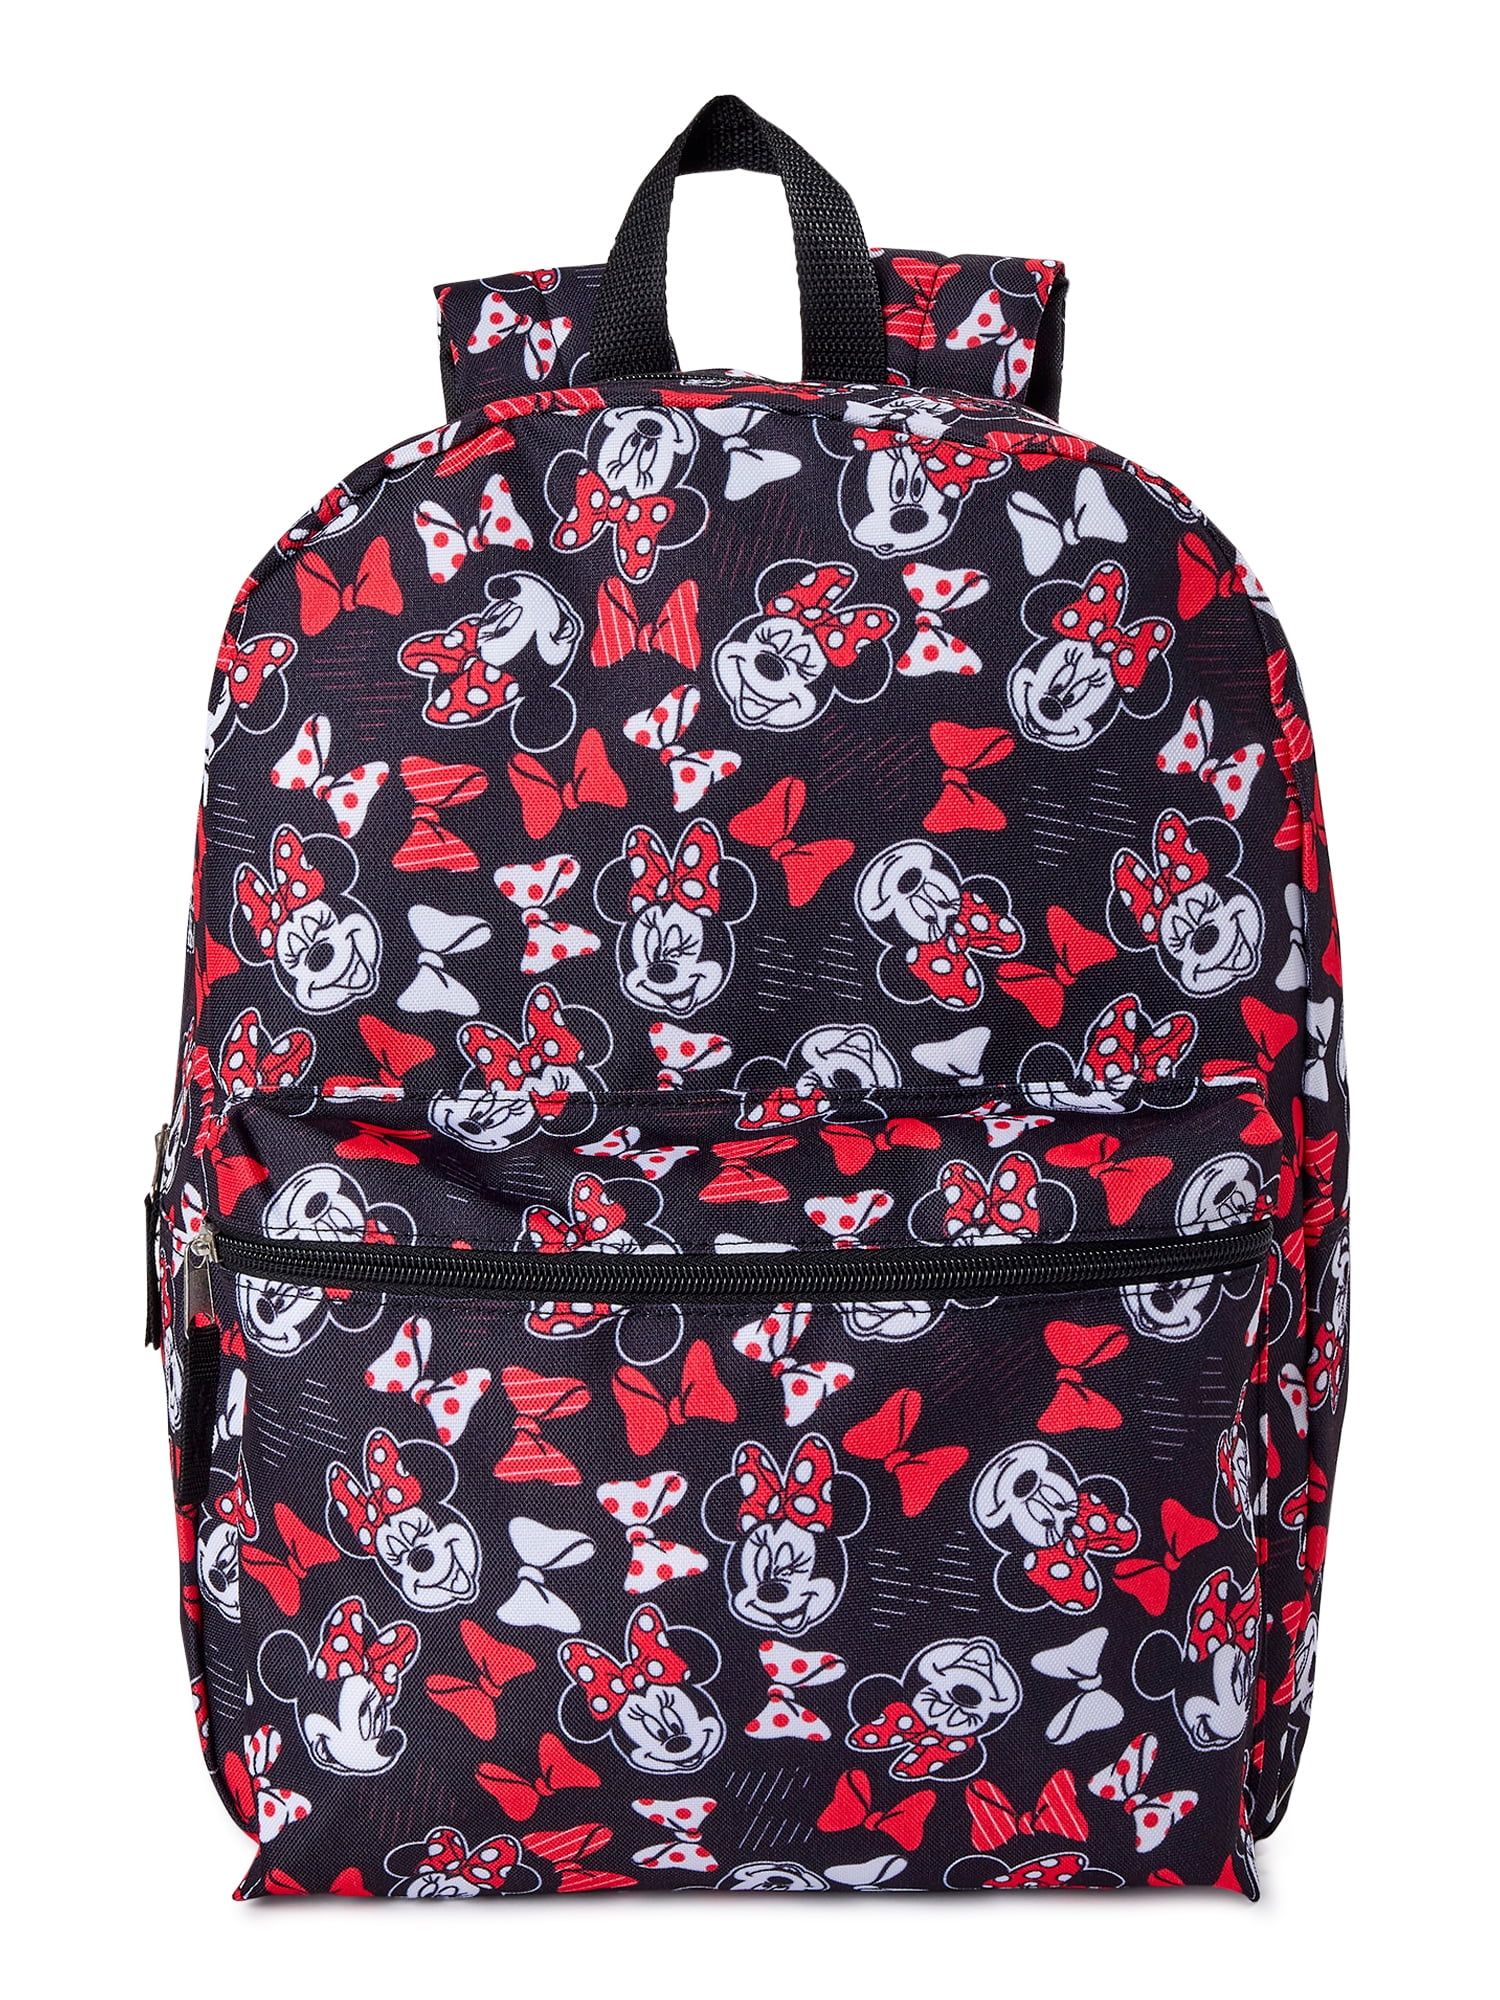 Disney Minnie Mouse Girl's All Over Print Backpack Black Red | Walmart (US)